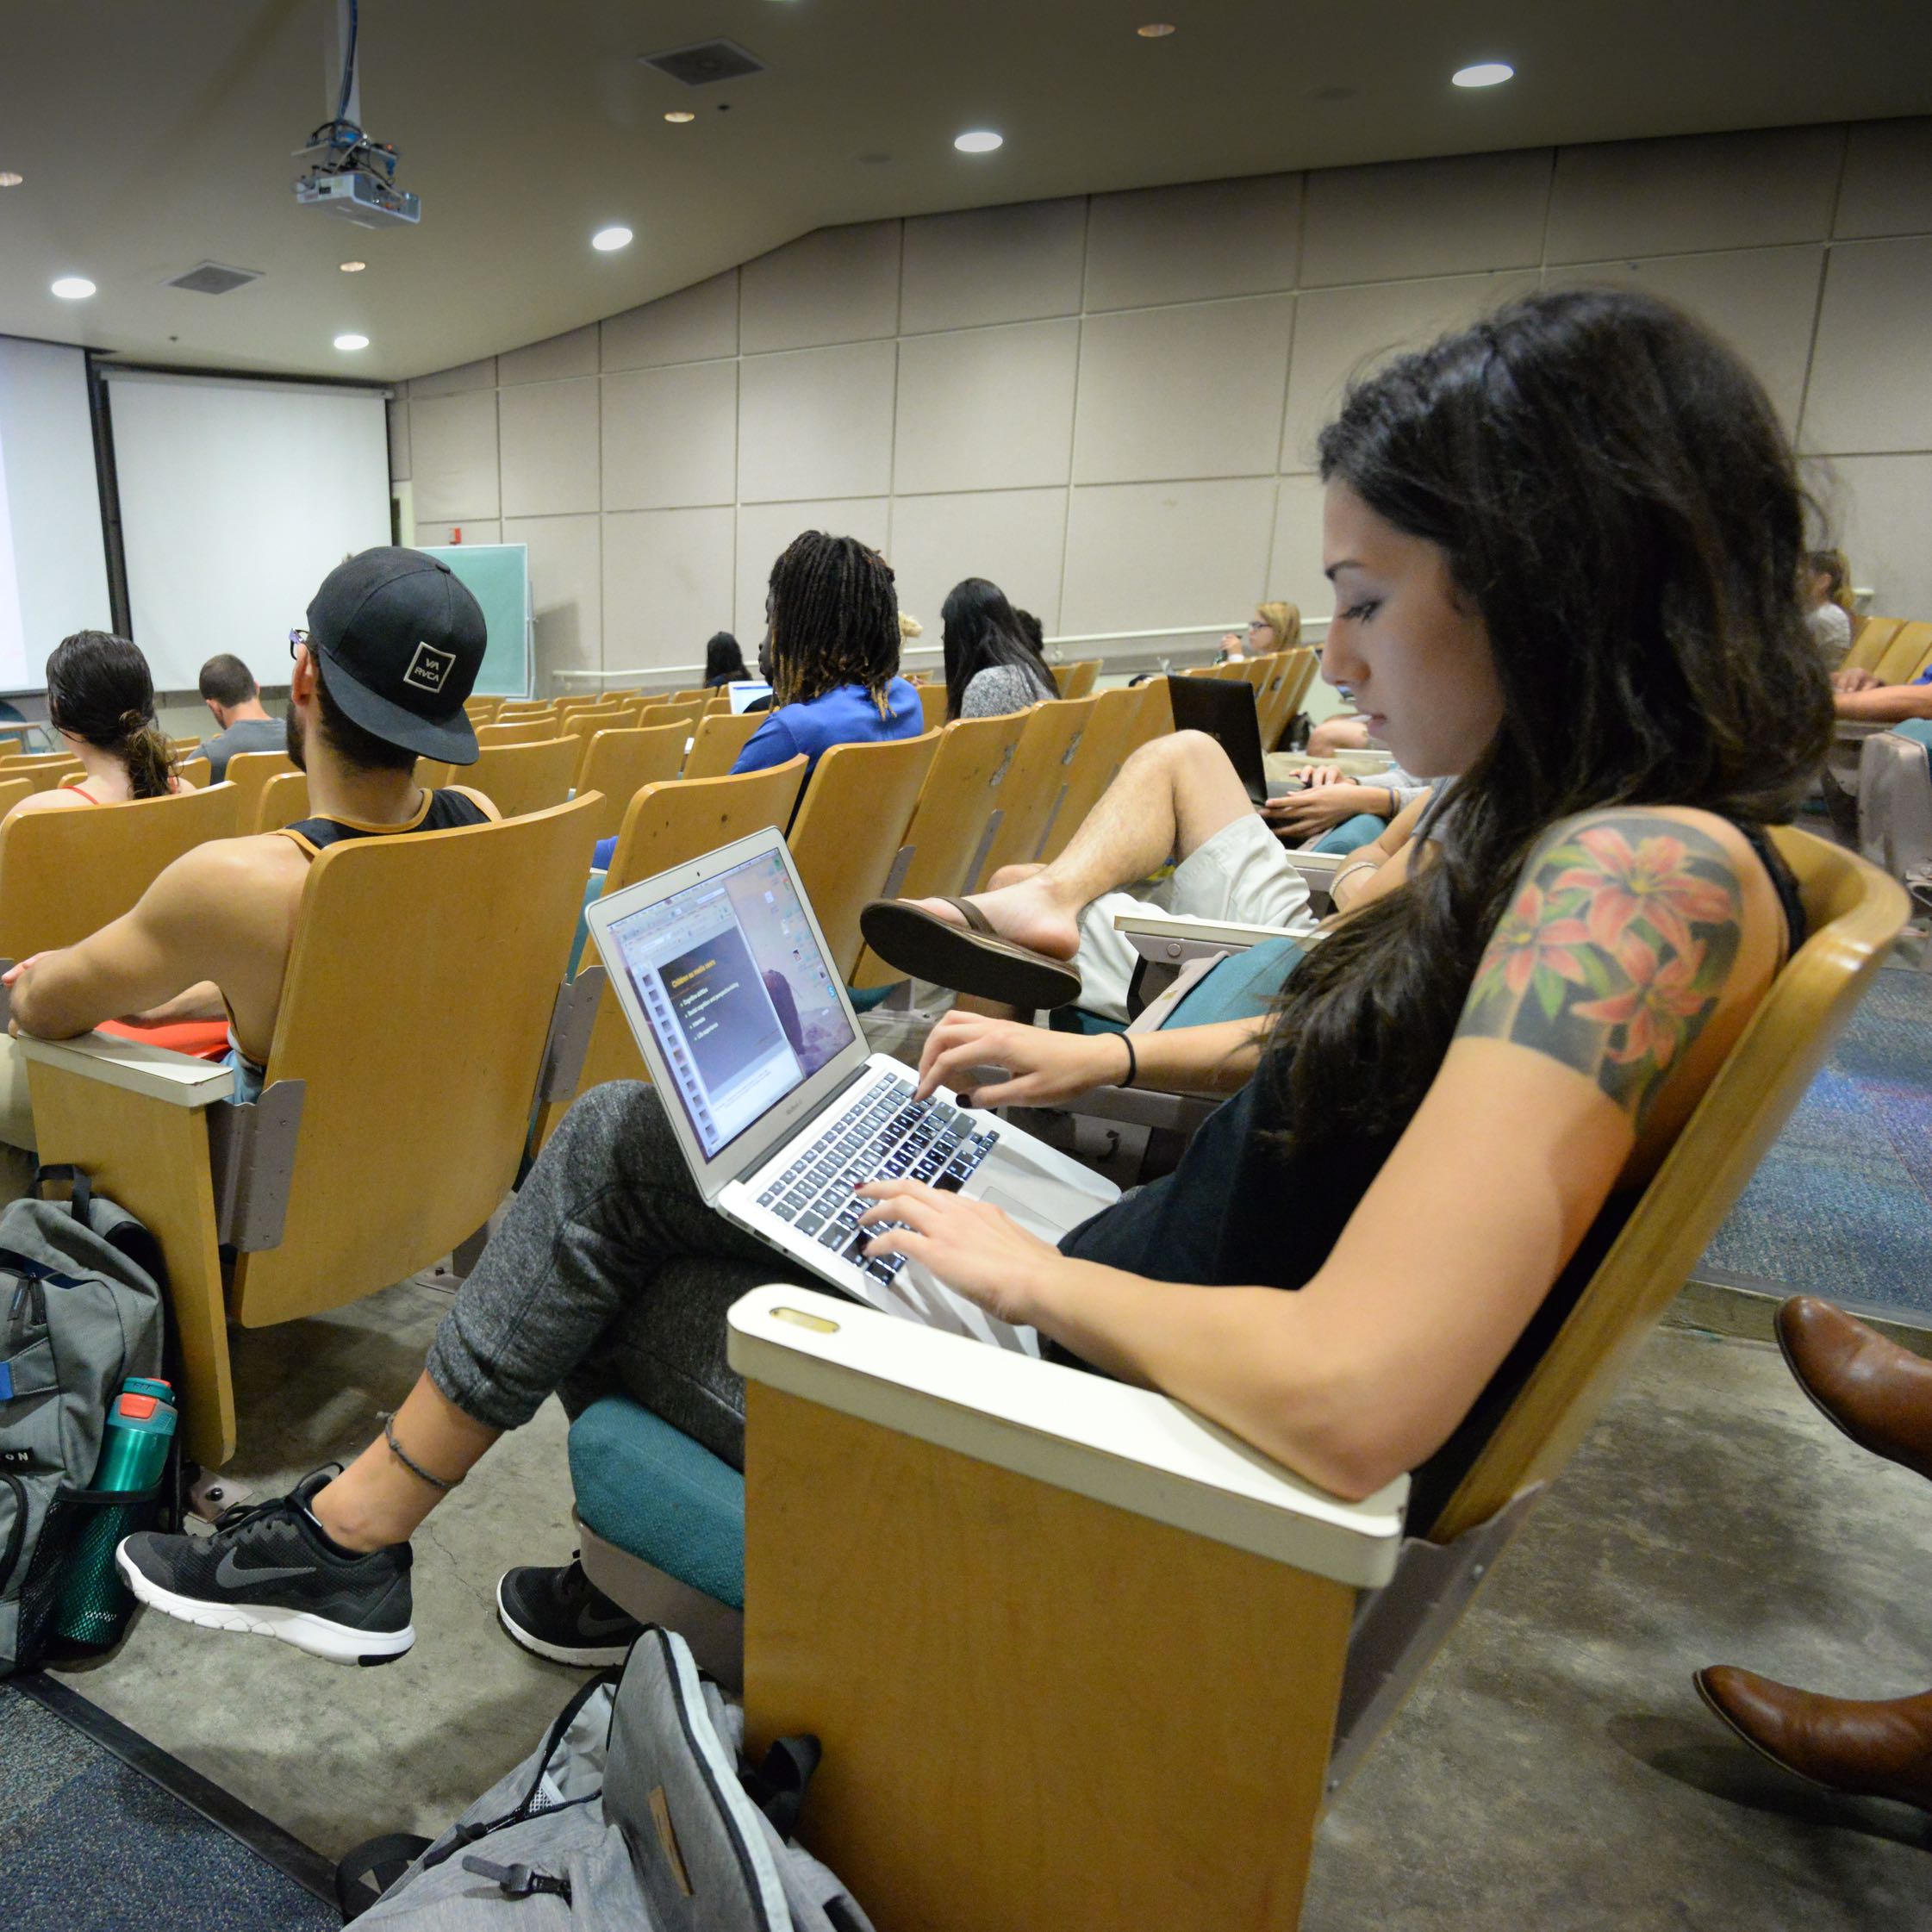 Student studying in lecture hall